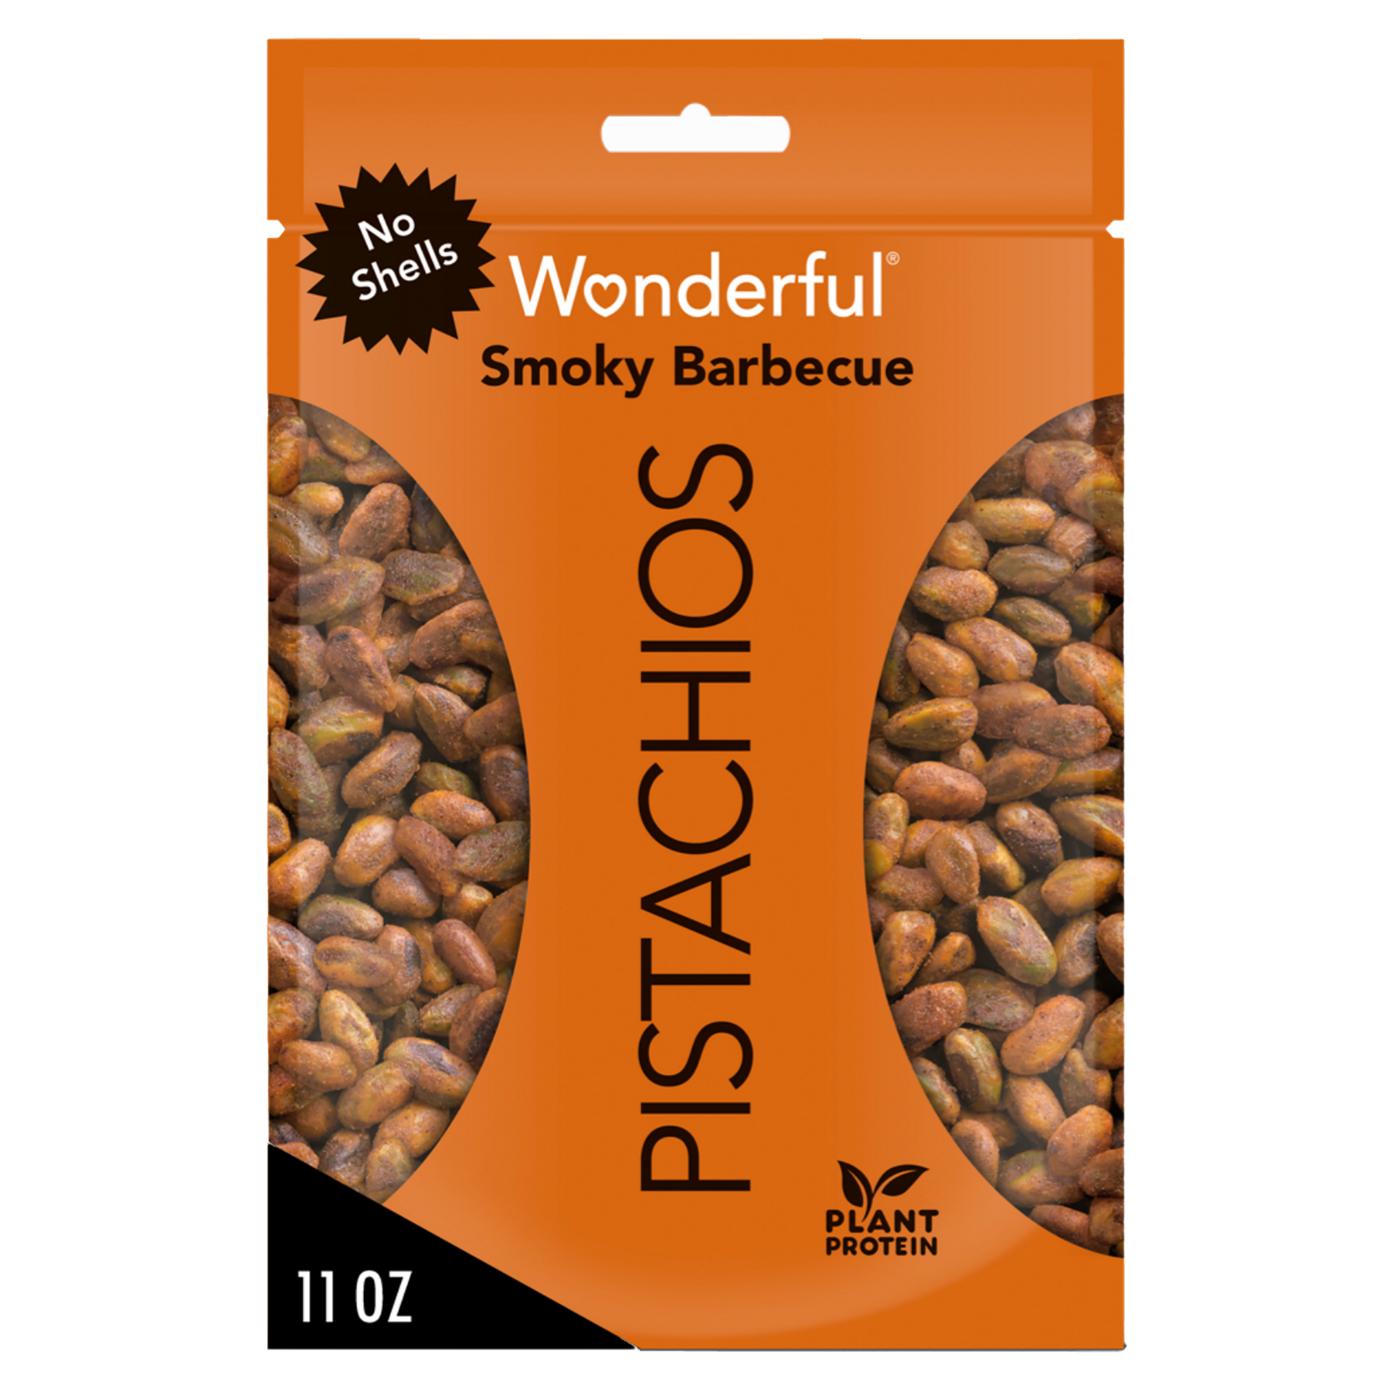 Wonderful No Shell Pistachios - Smoky Barbeque; image 1 of 7